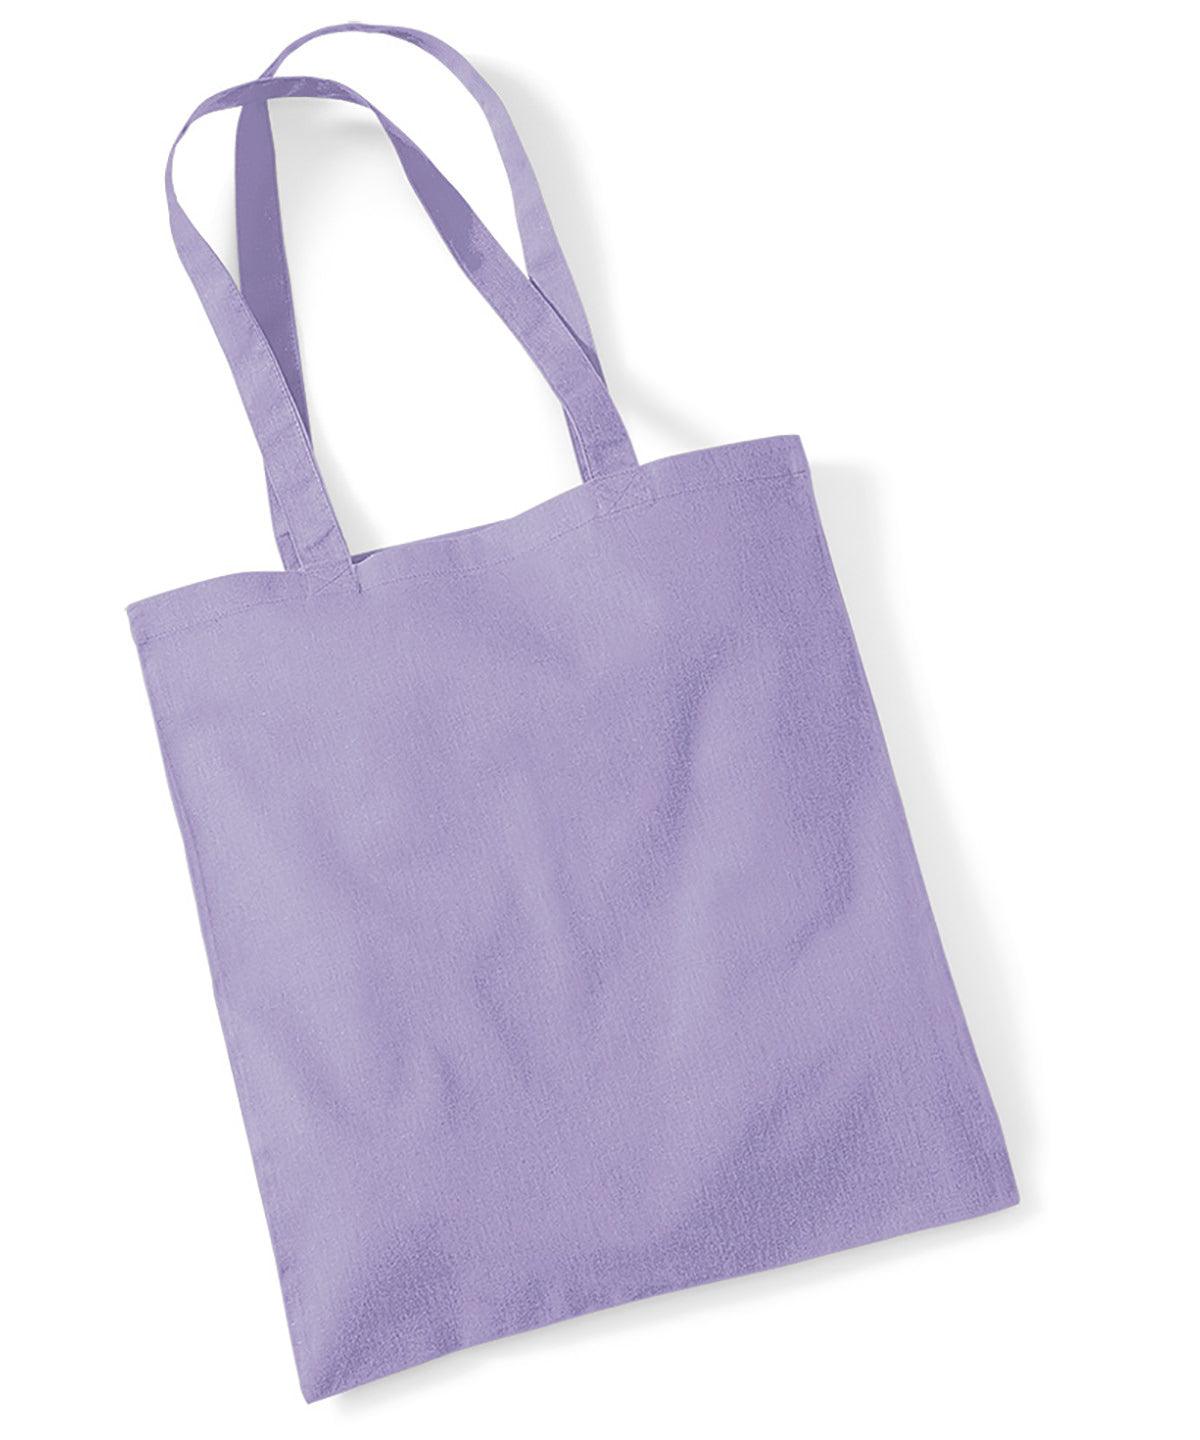 Lavender - Bag for life - long handles Bags Westford Mill Bags & Luggage, Crafting, Must Haves, Rebrandable Schoolwear Centres